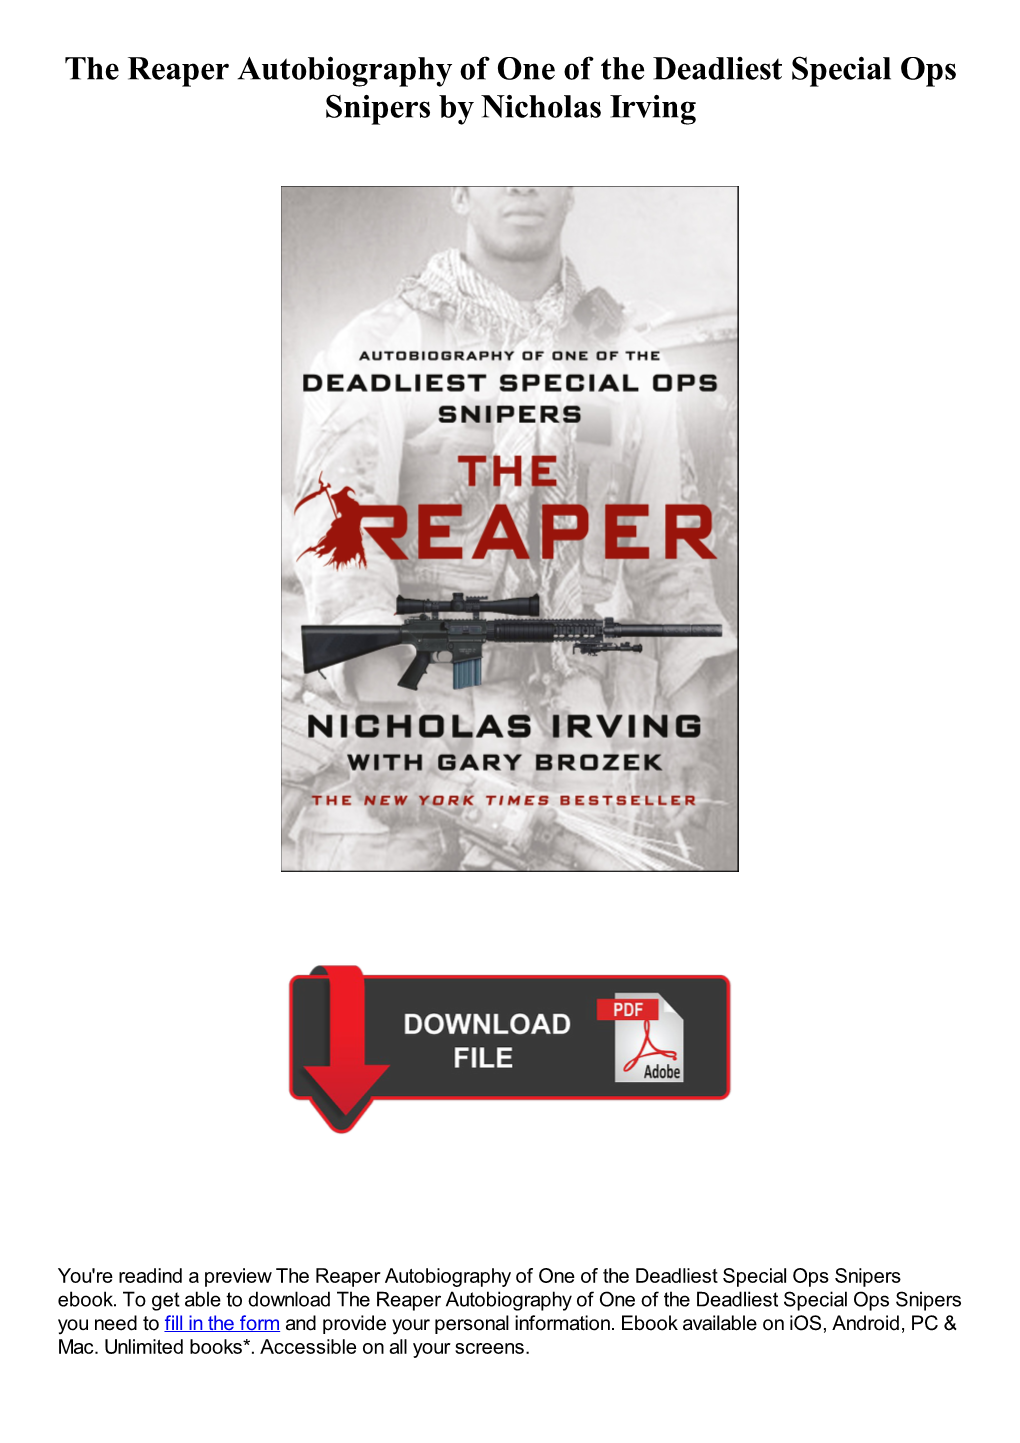 The Reaper Autobiography of One of the Deadliest Special Ops Snipers by Nicholas Irving